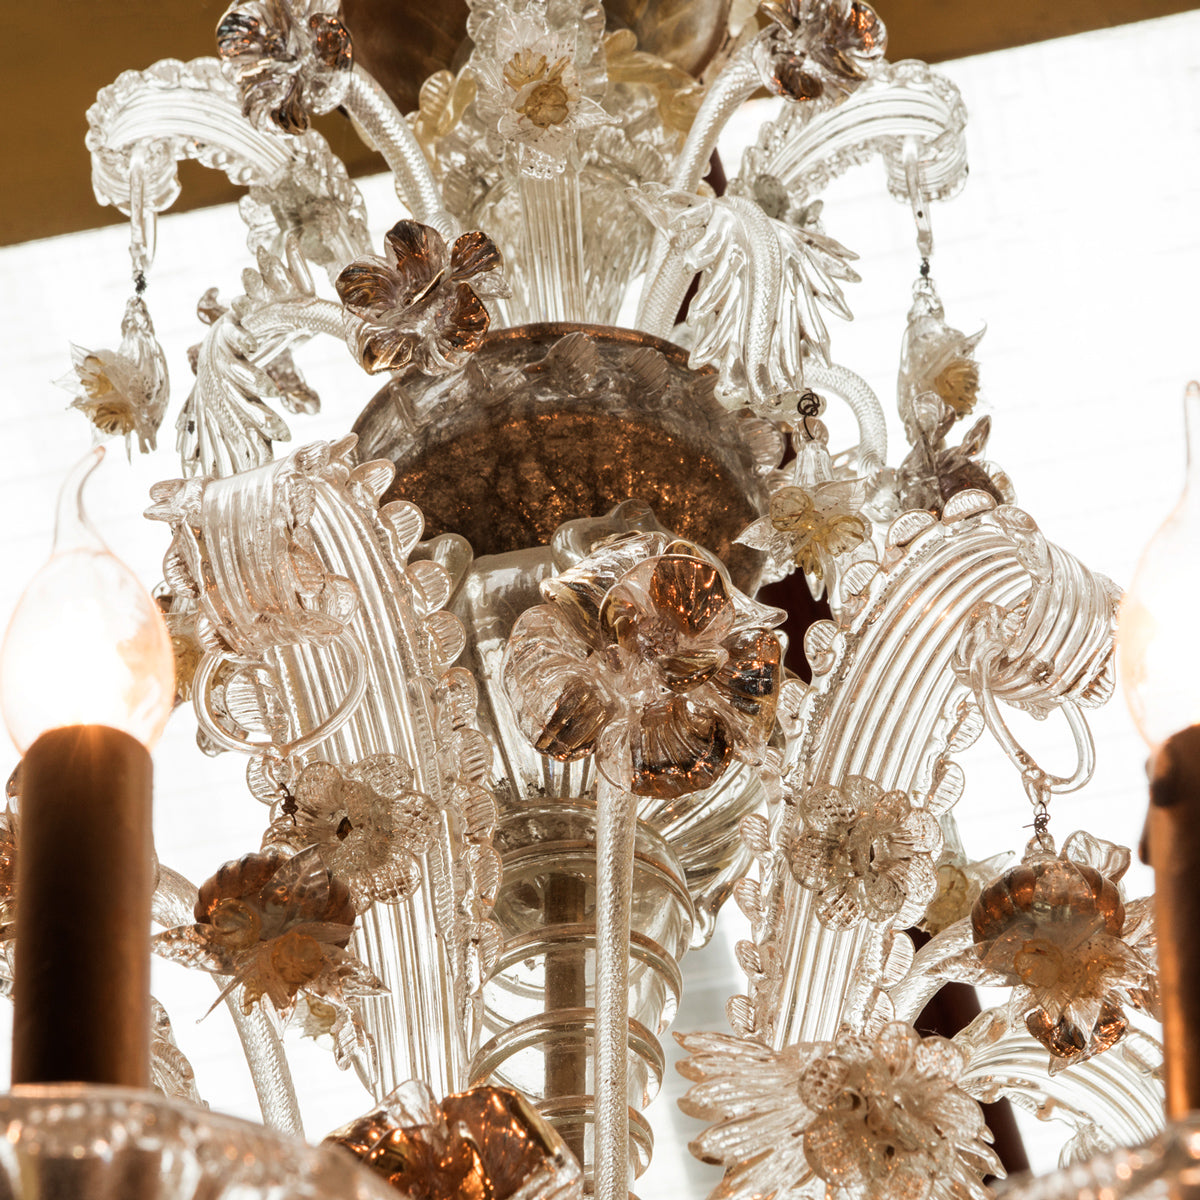 Large White and Gold Venetian Murano Glass Chandelier